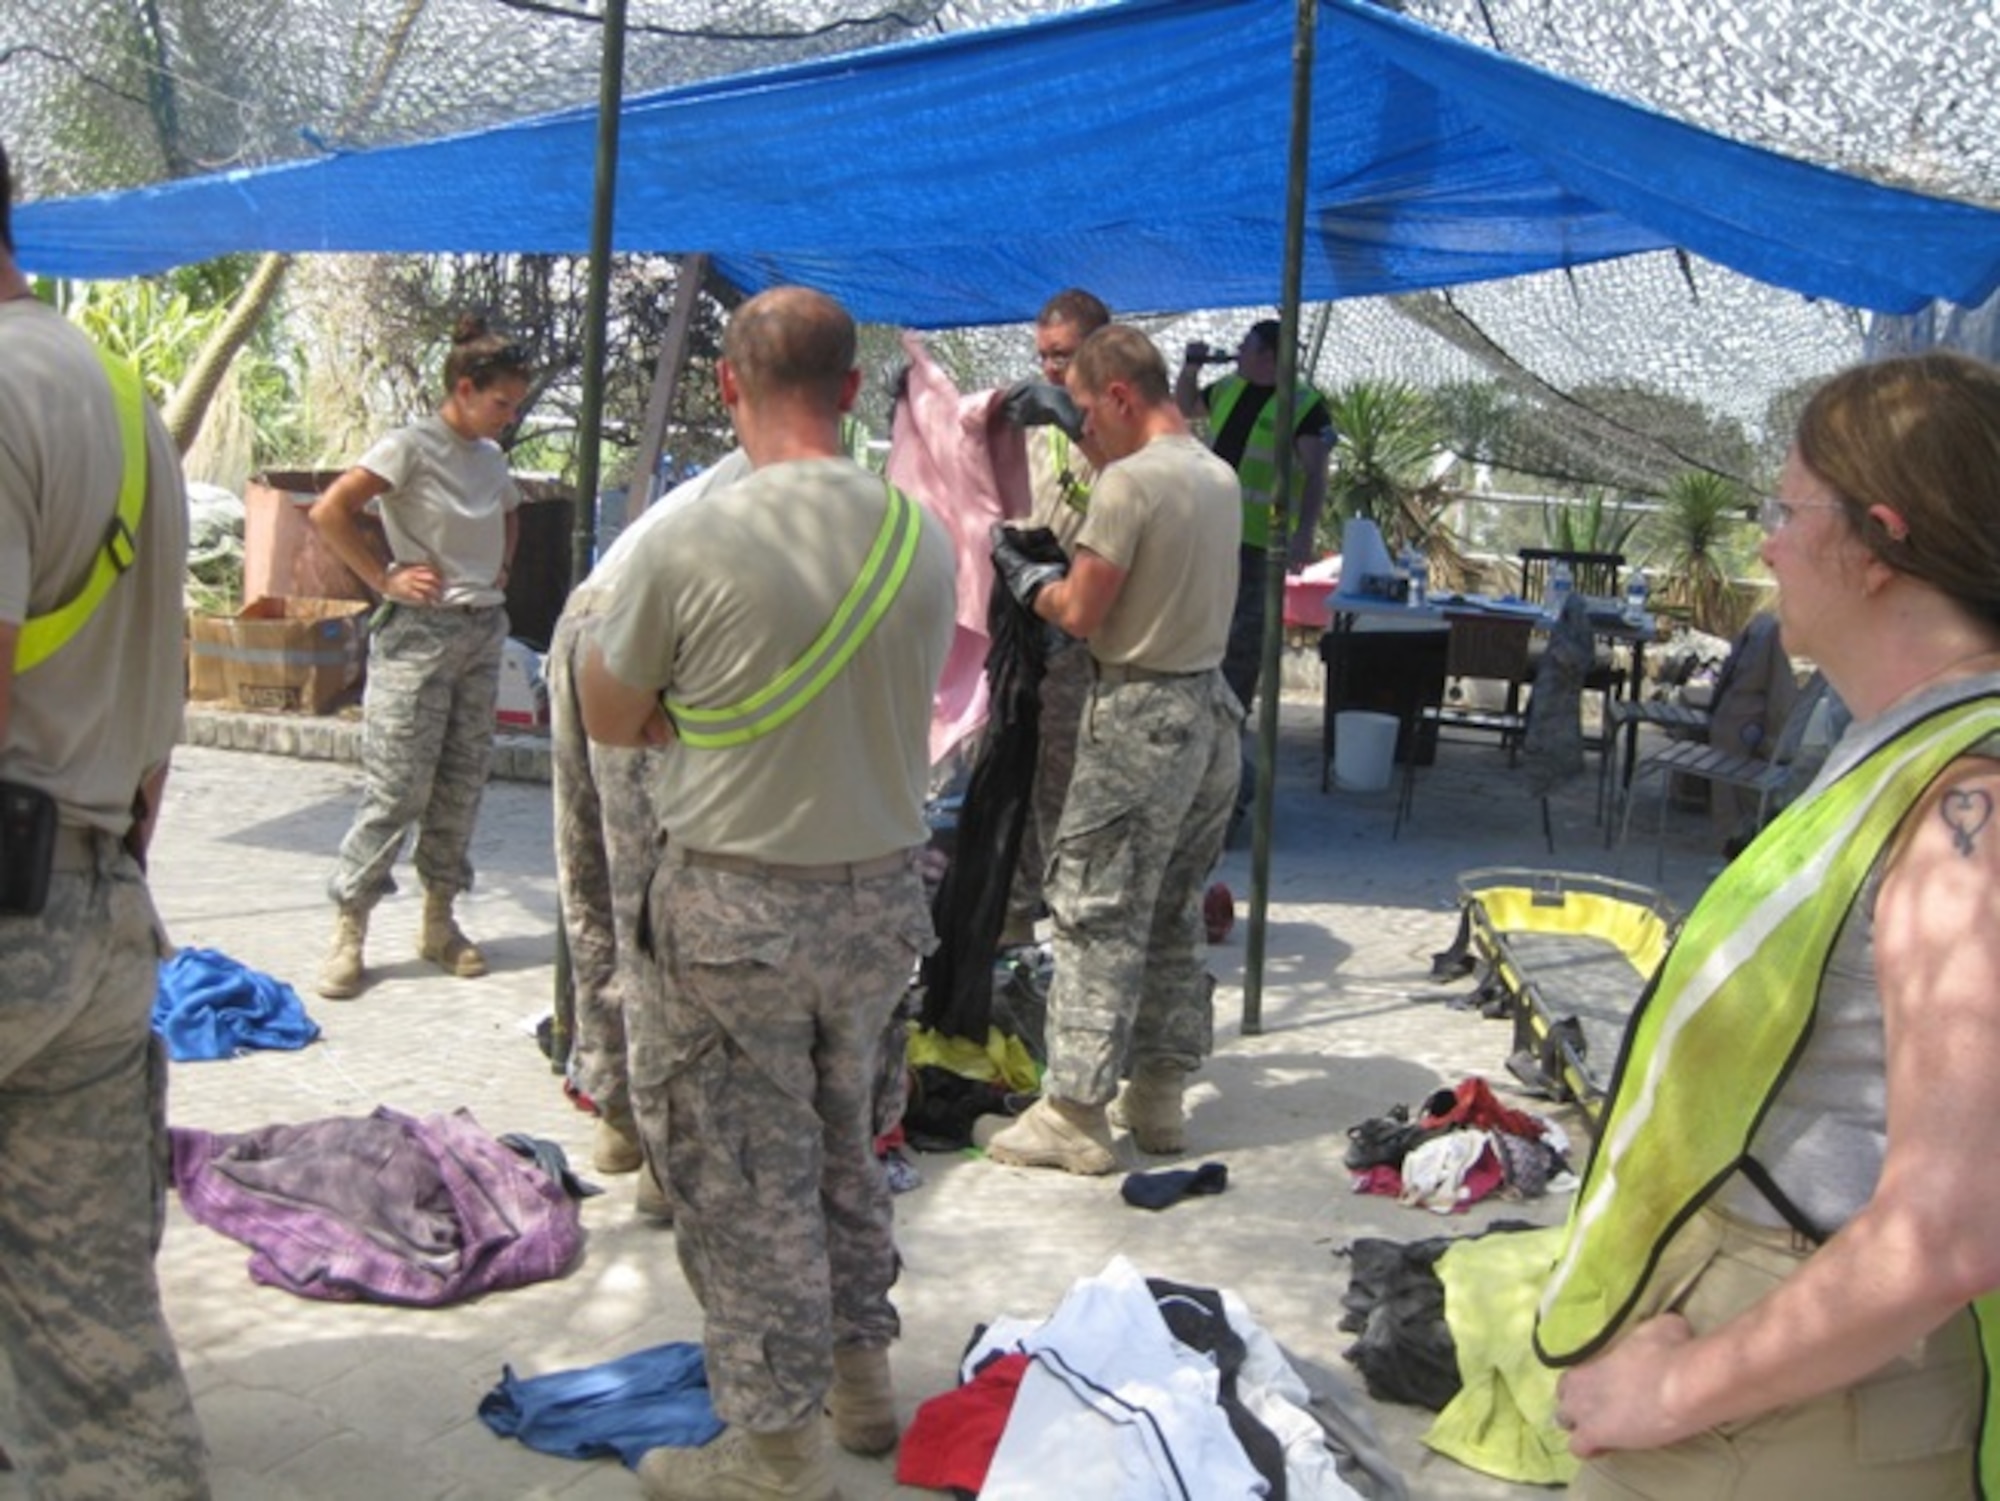 Connecticut’s own Master Sgt. Melissa Letizio, noncommissioned officer in charge of billeting, 24th Air Expeditionary Group, helps other search and recovery personnel sort personal affects found at the Hotel Montana site in Port-au-Prince, Haiti. (Photo courtesy of TSgt. Bambi Putinas)